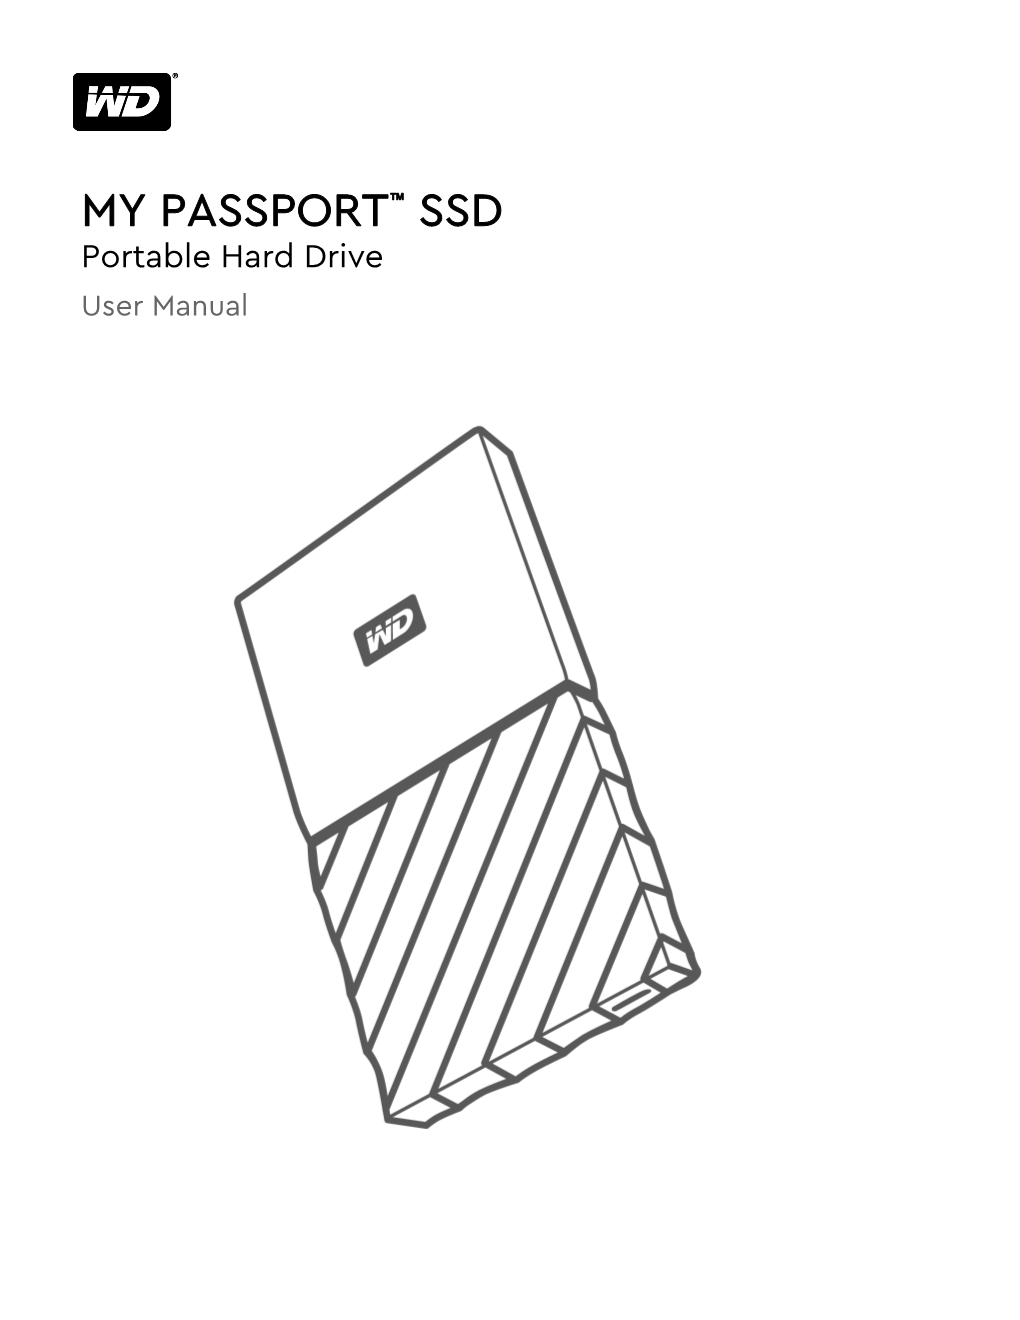 MY PASSPORT™ SSD Portable Hard Drive User Manual Accessing Online Support Visit Our Product Support Website at and Choose from These Topics